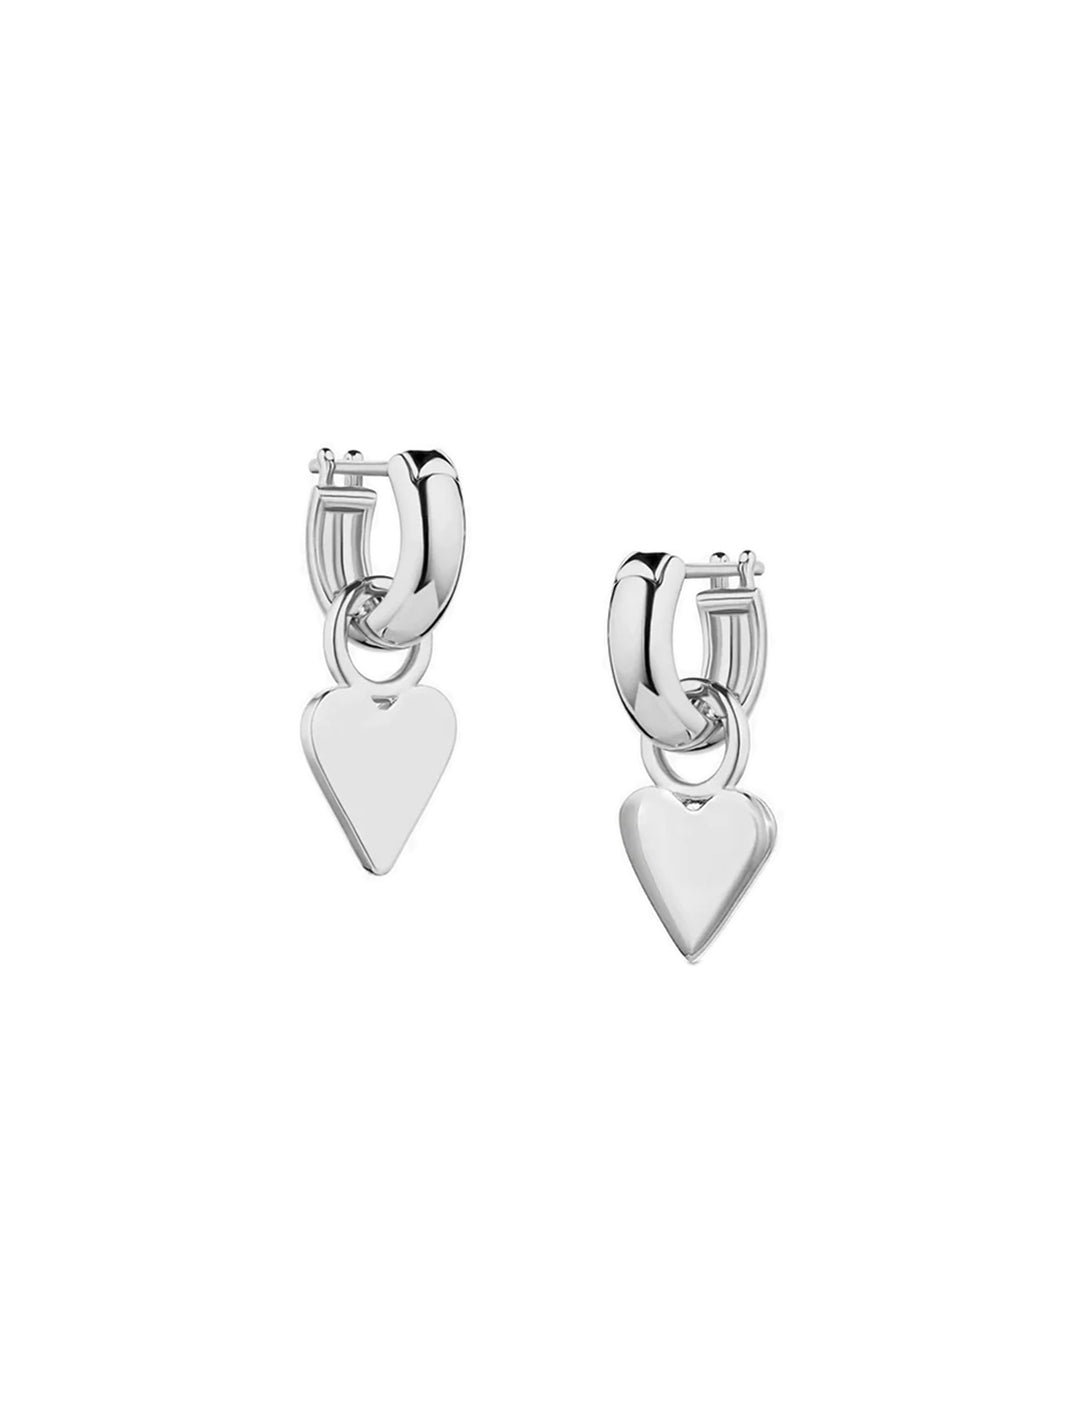 Front view of THATCH's petite heart earrings in silver.